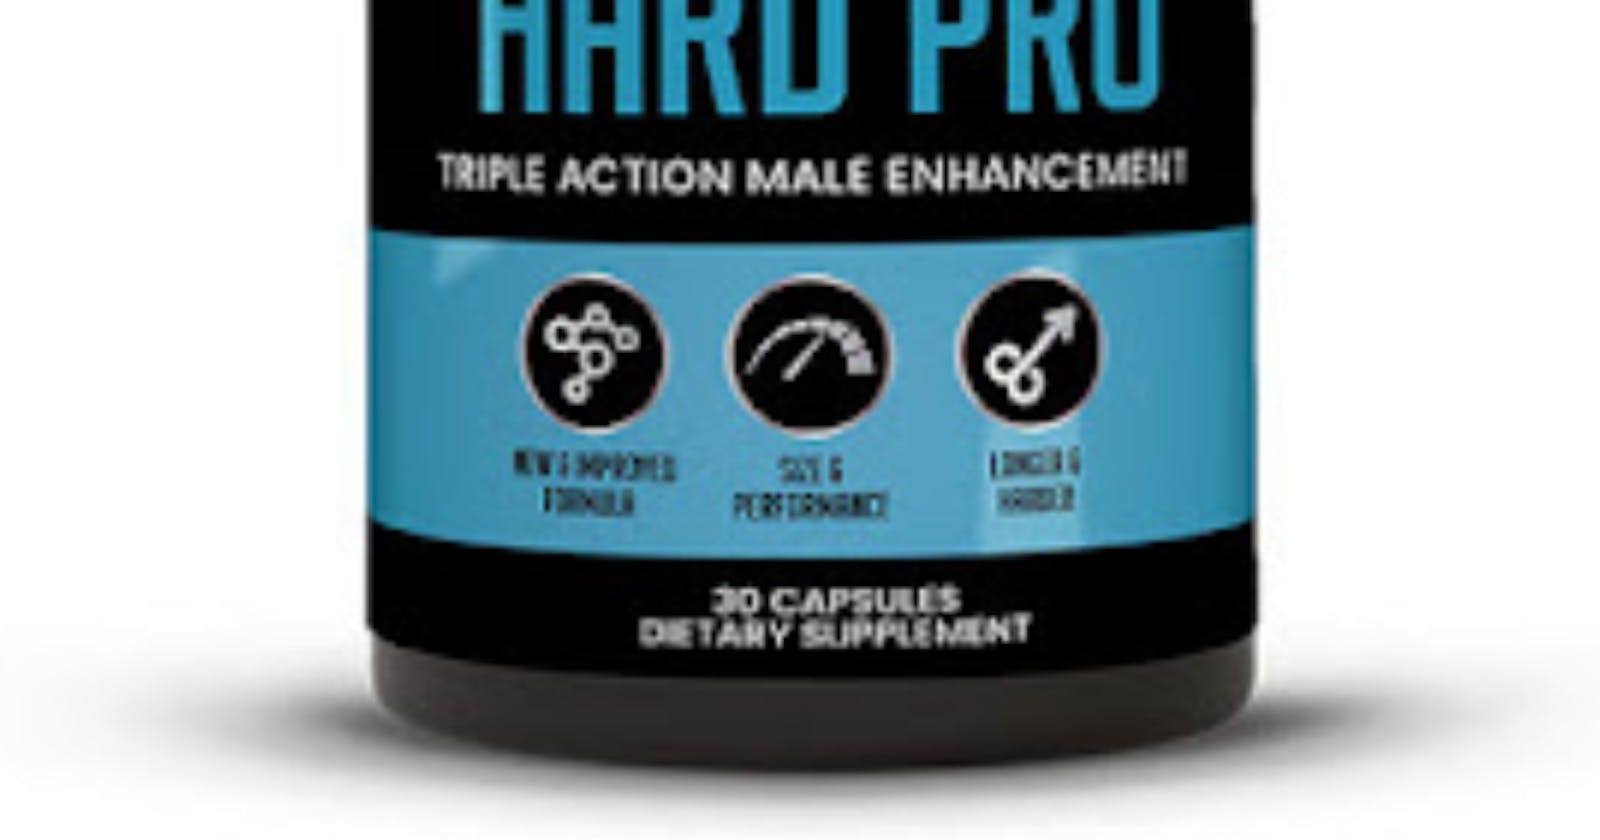 Diamond Hard Pro Male Enhancement Reviews (Scam or Legit) – Pros, Cons, Side effects and How It works Shocking Scam Controversy or Effective?